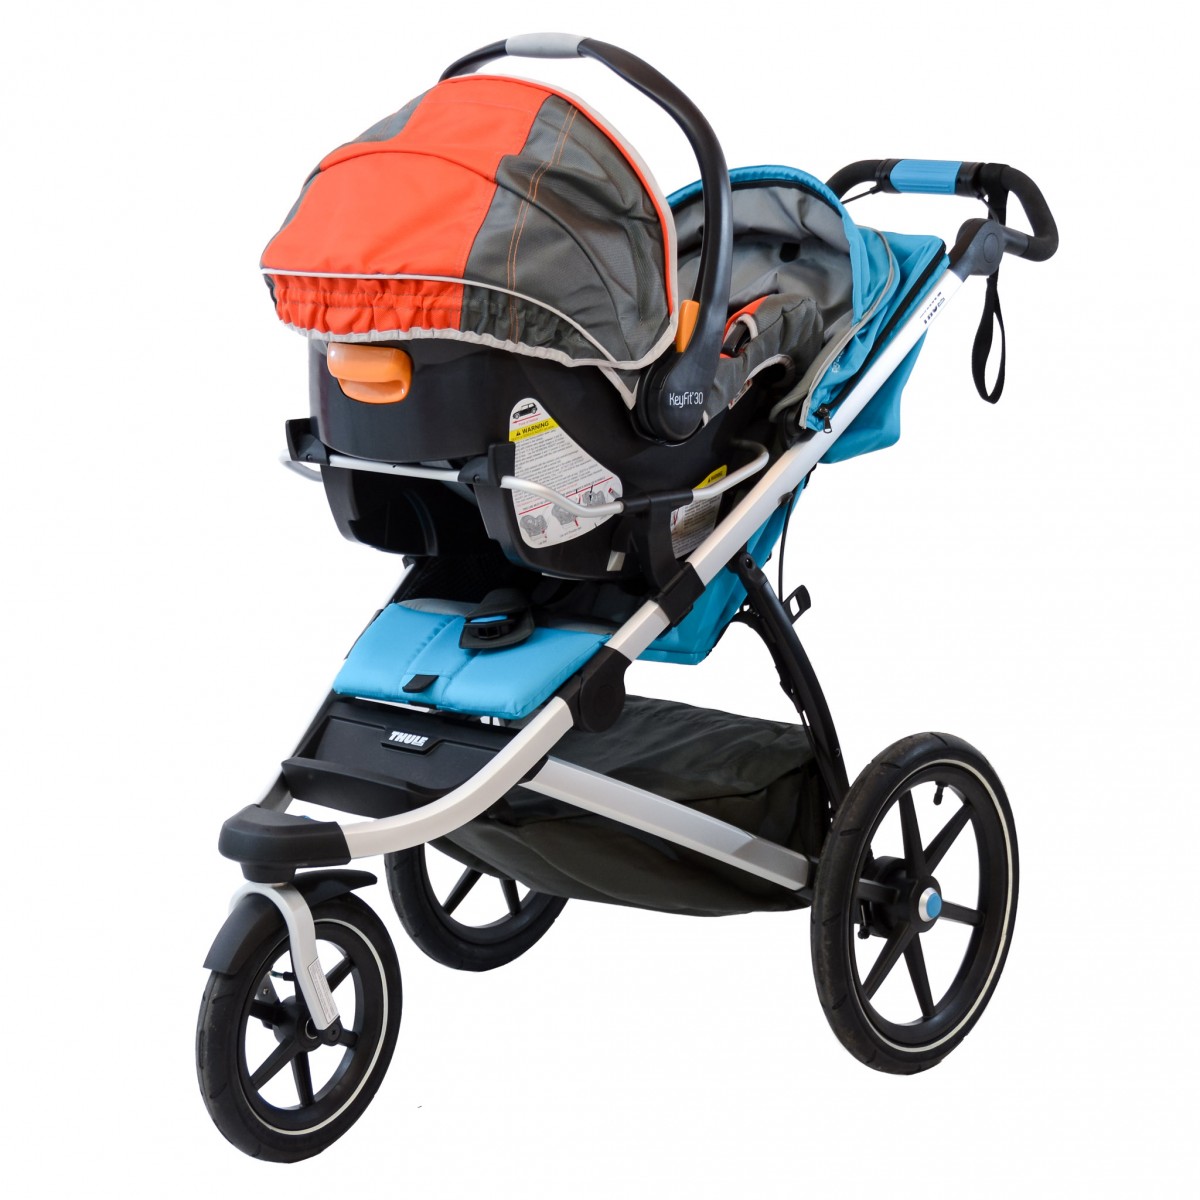 thule urban glide 2 combo stroller and car seat combo review